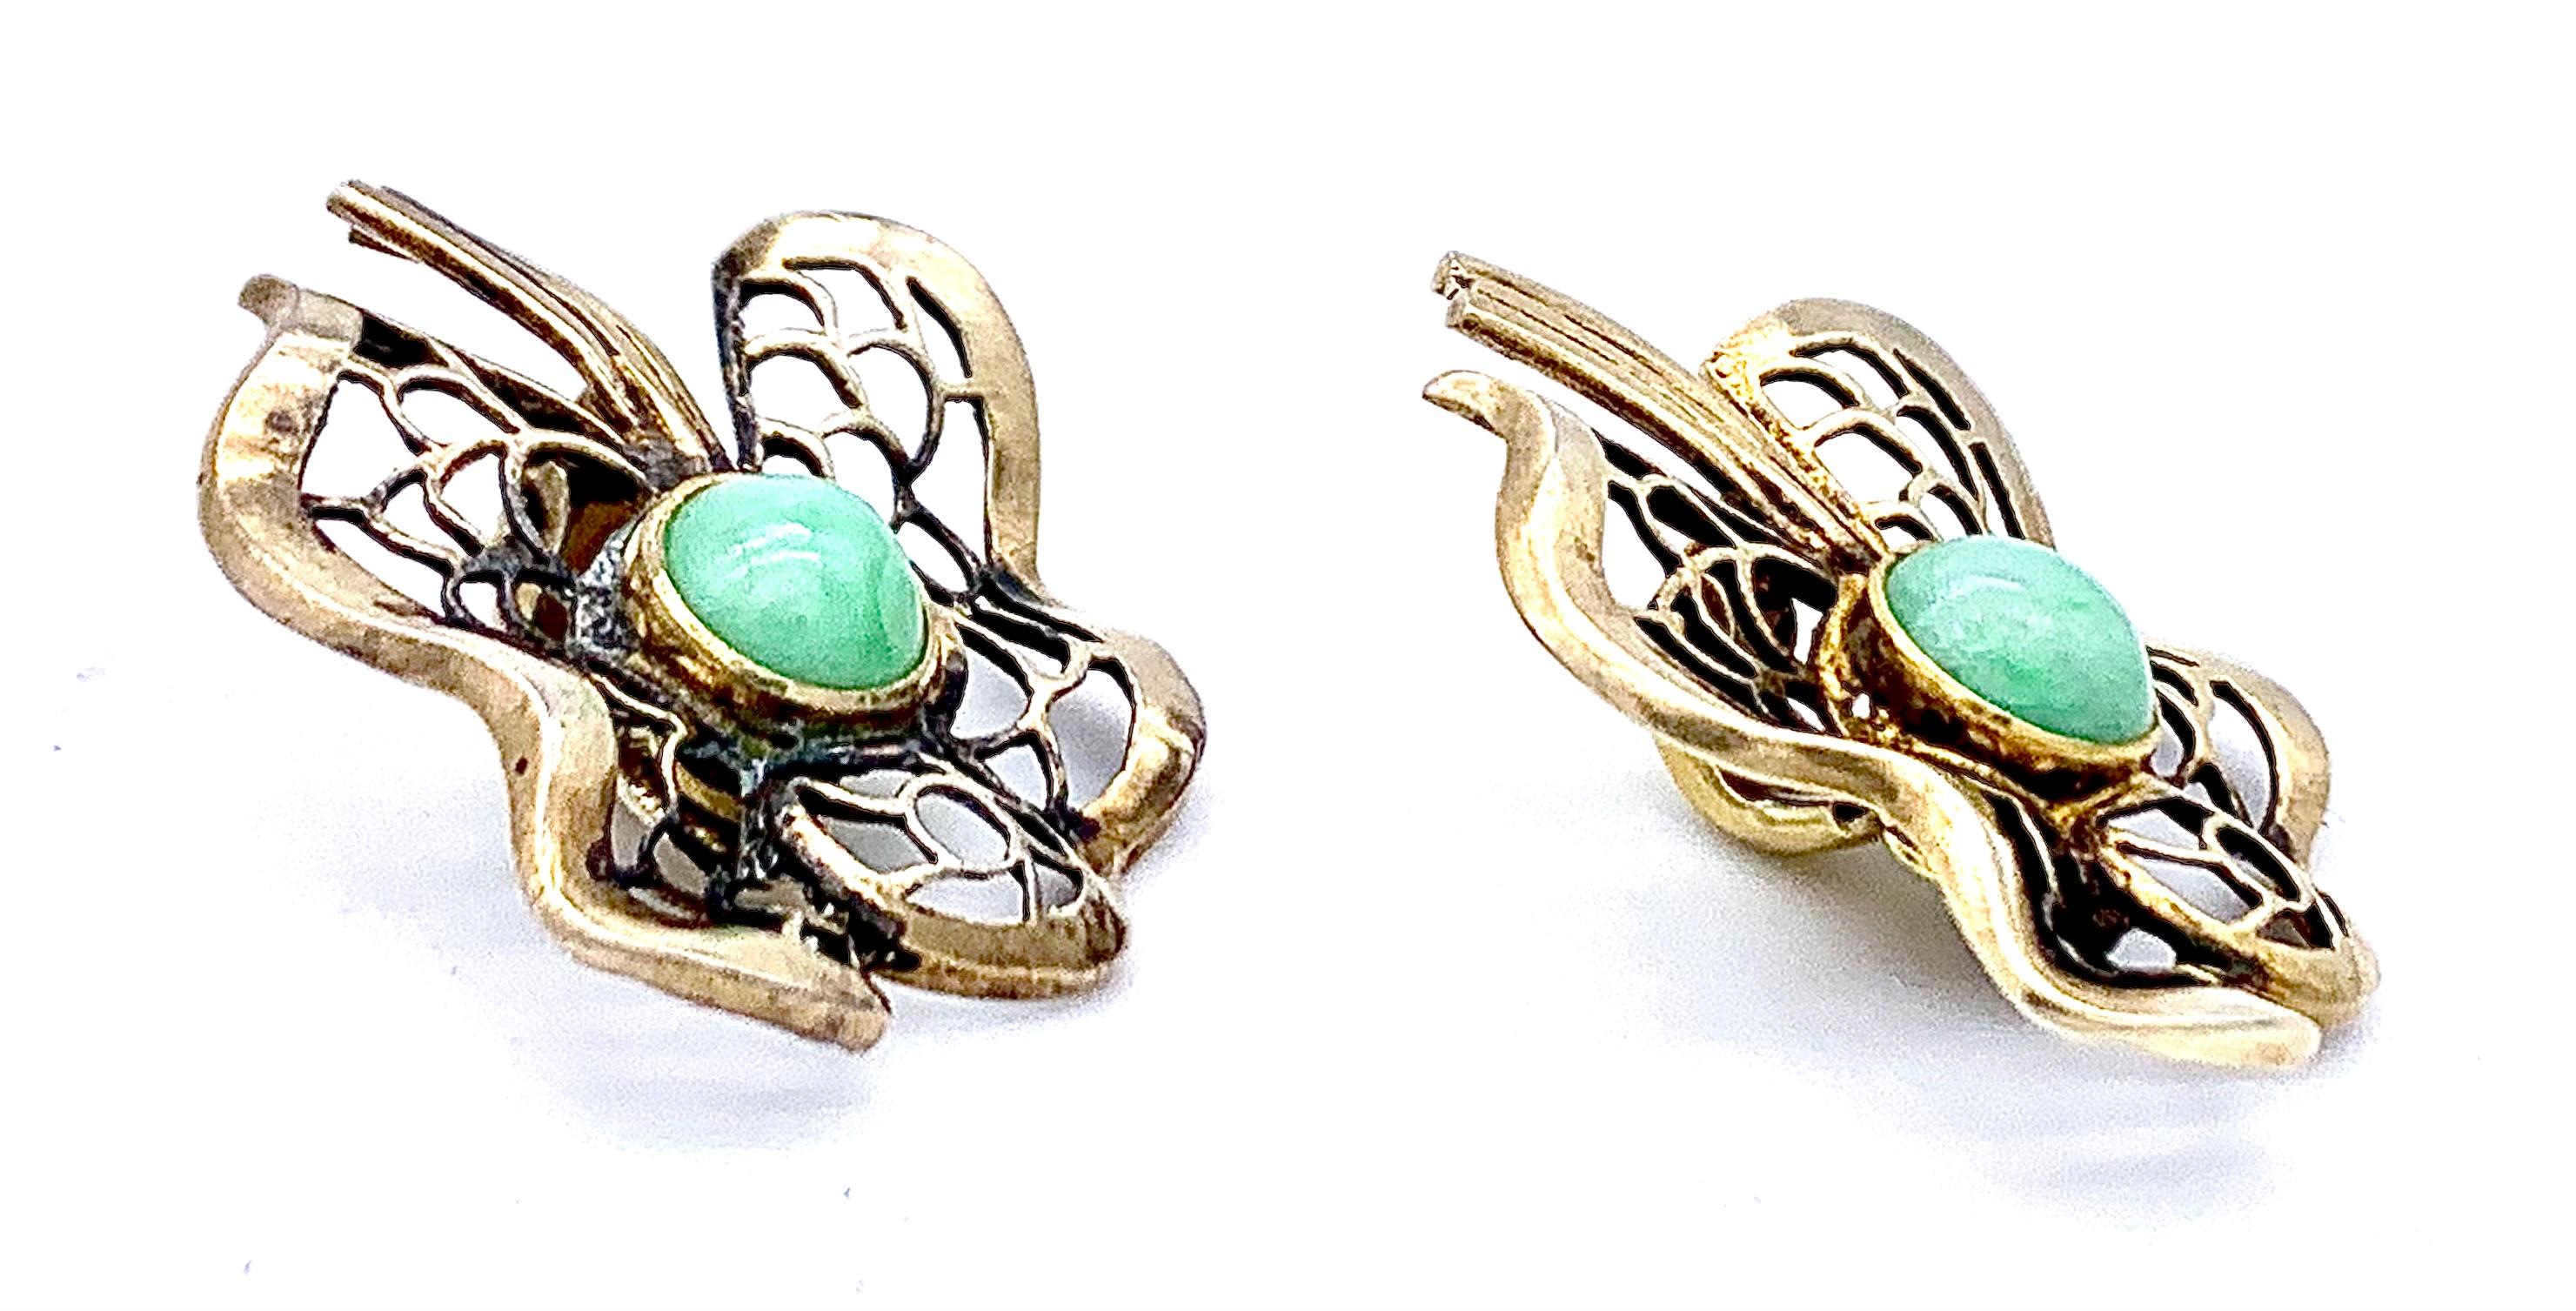 This charming pair of Art Deco earrings is designed as leaves with a ribbon and decorated with a jade cabochon.